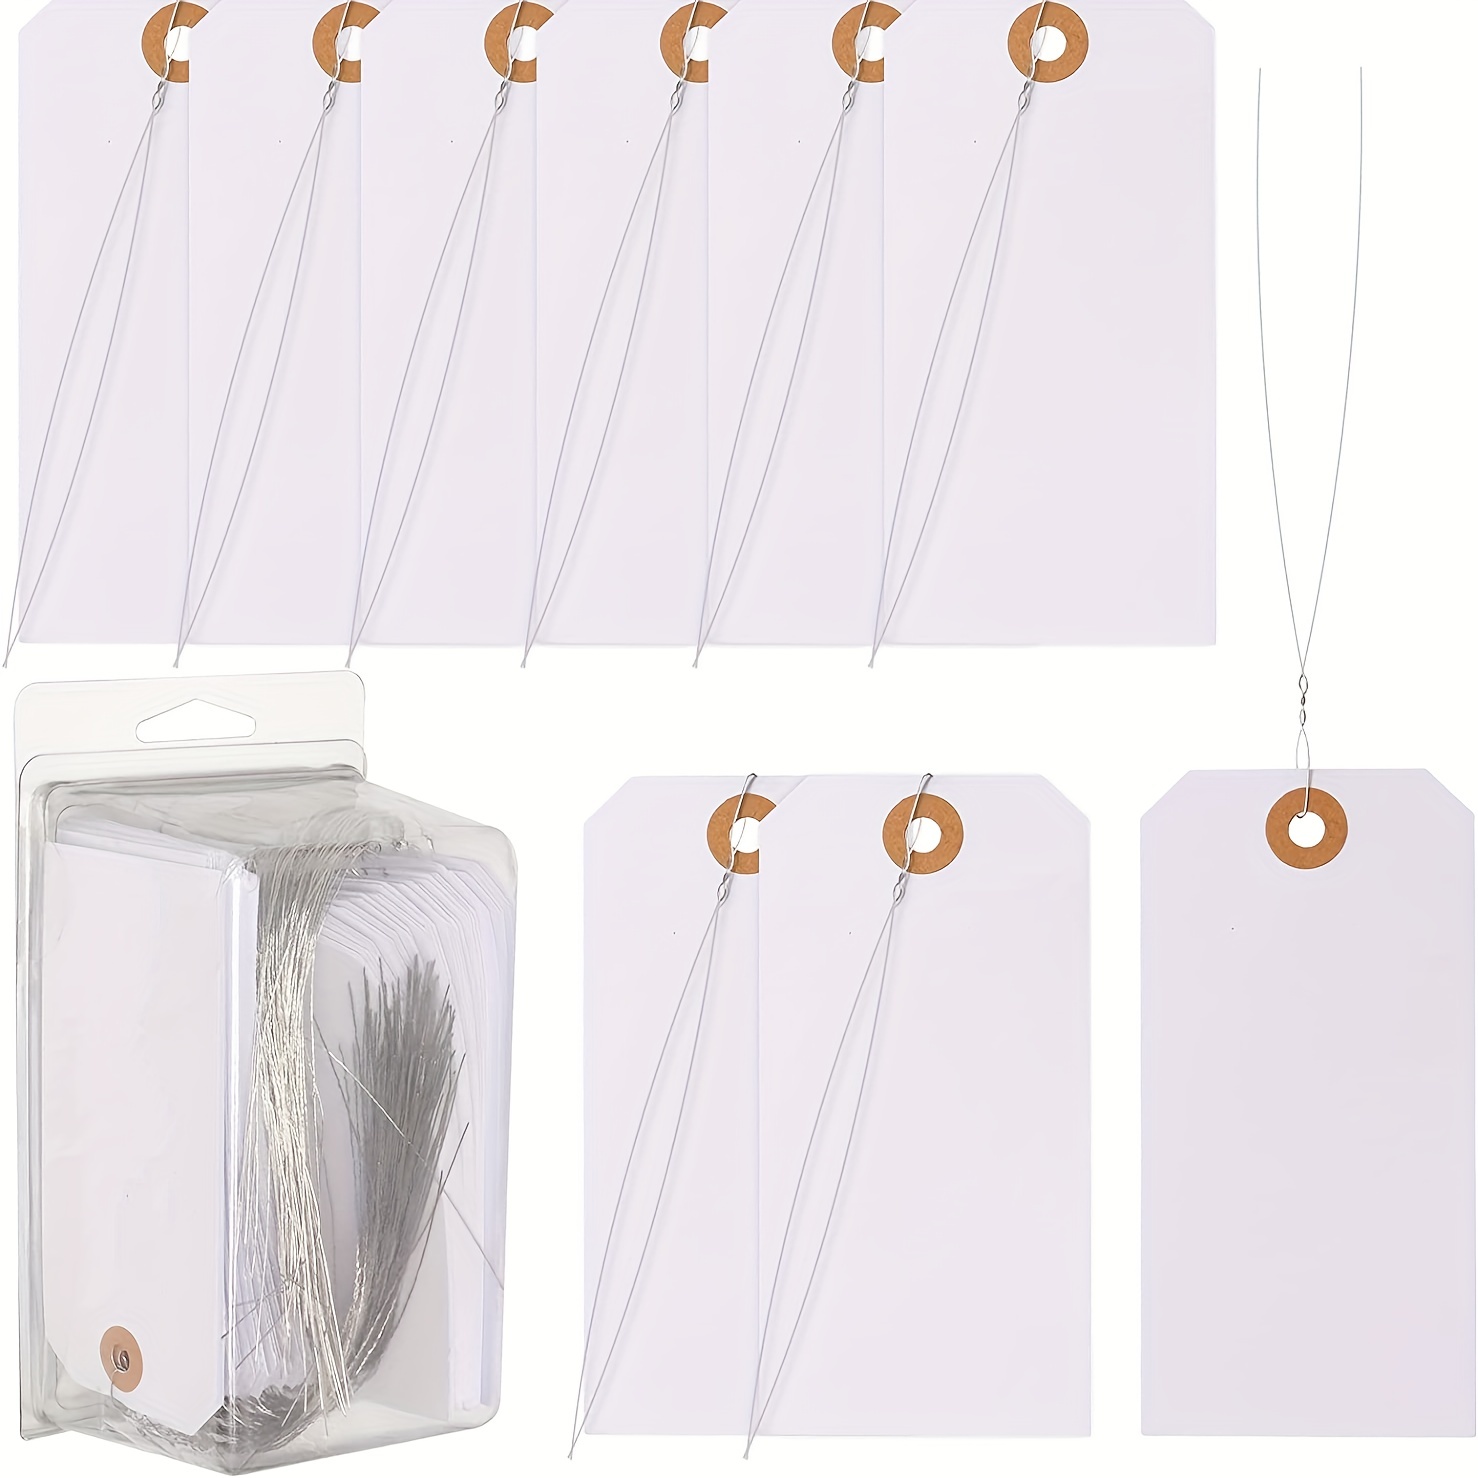 White Tags with String Attached - 4 3/4 x 2 3/8 - Box of 50 Hang Tags  with String Attached, Large Blank Plain Tags with String and Reinforced  Hole